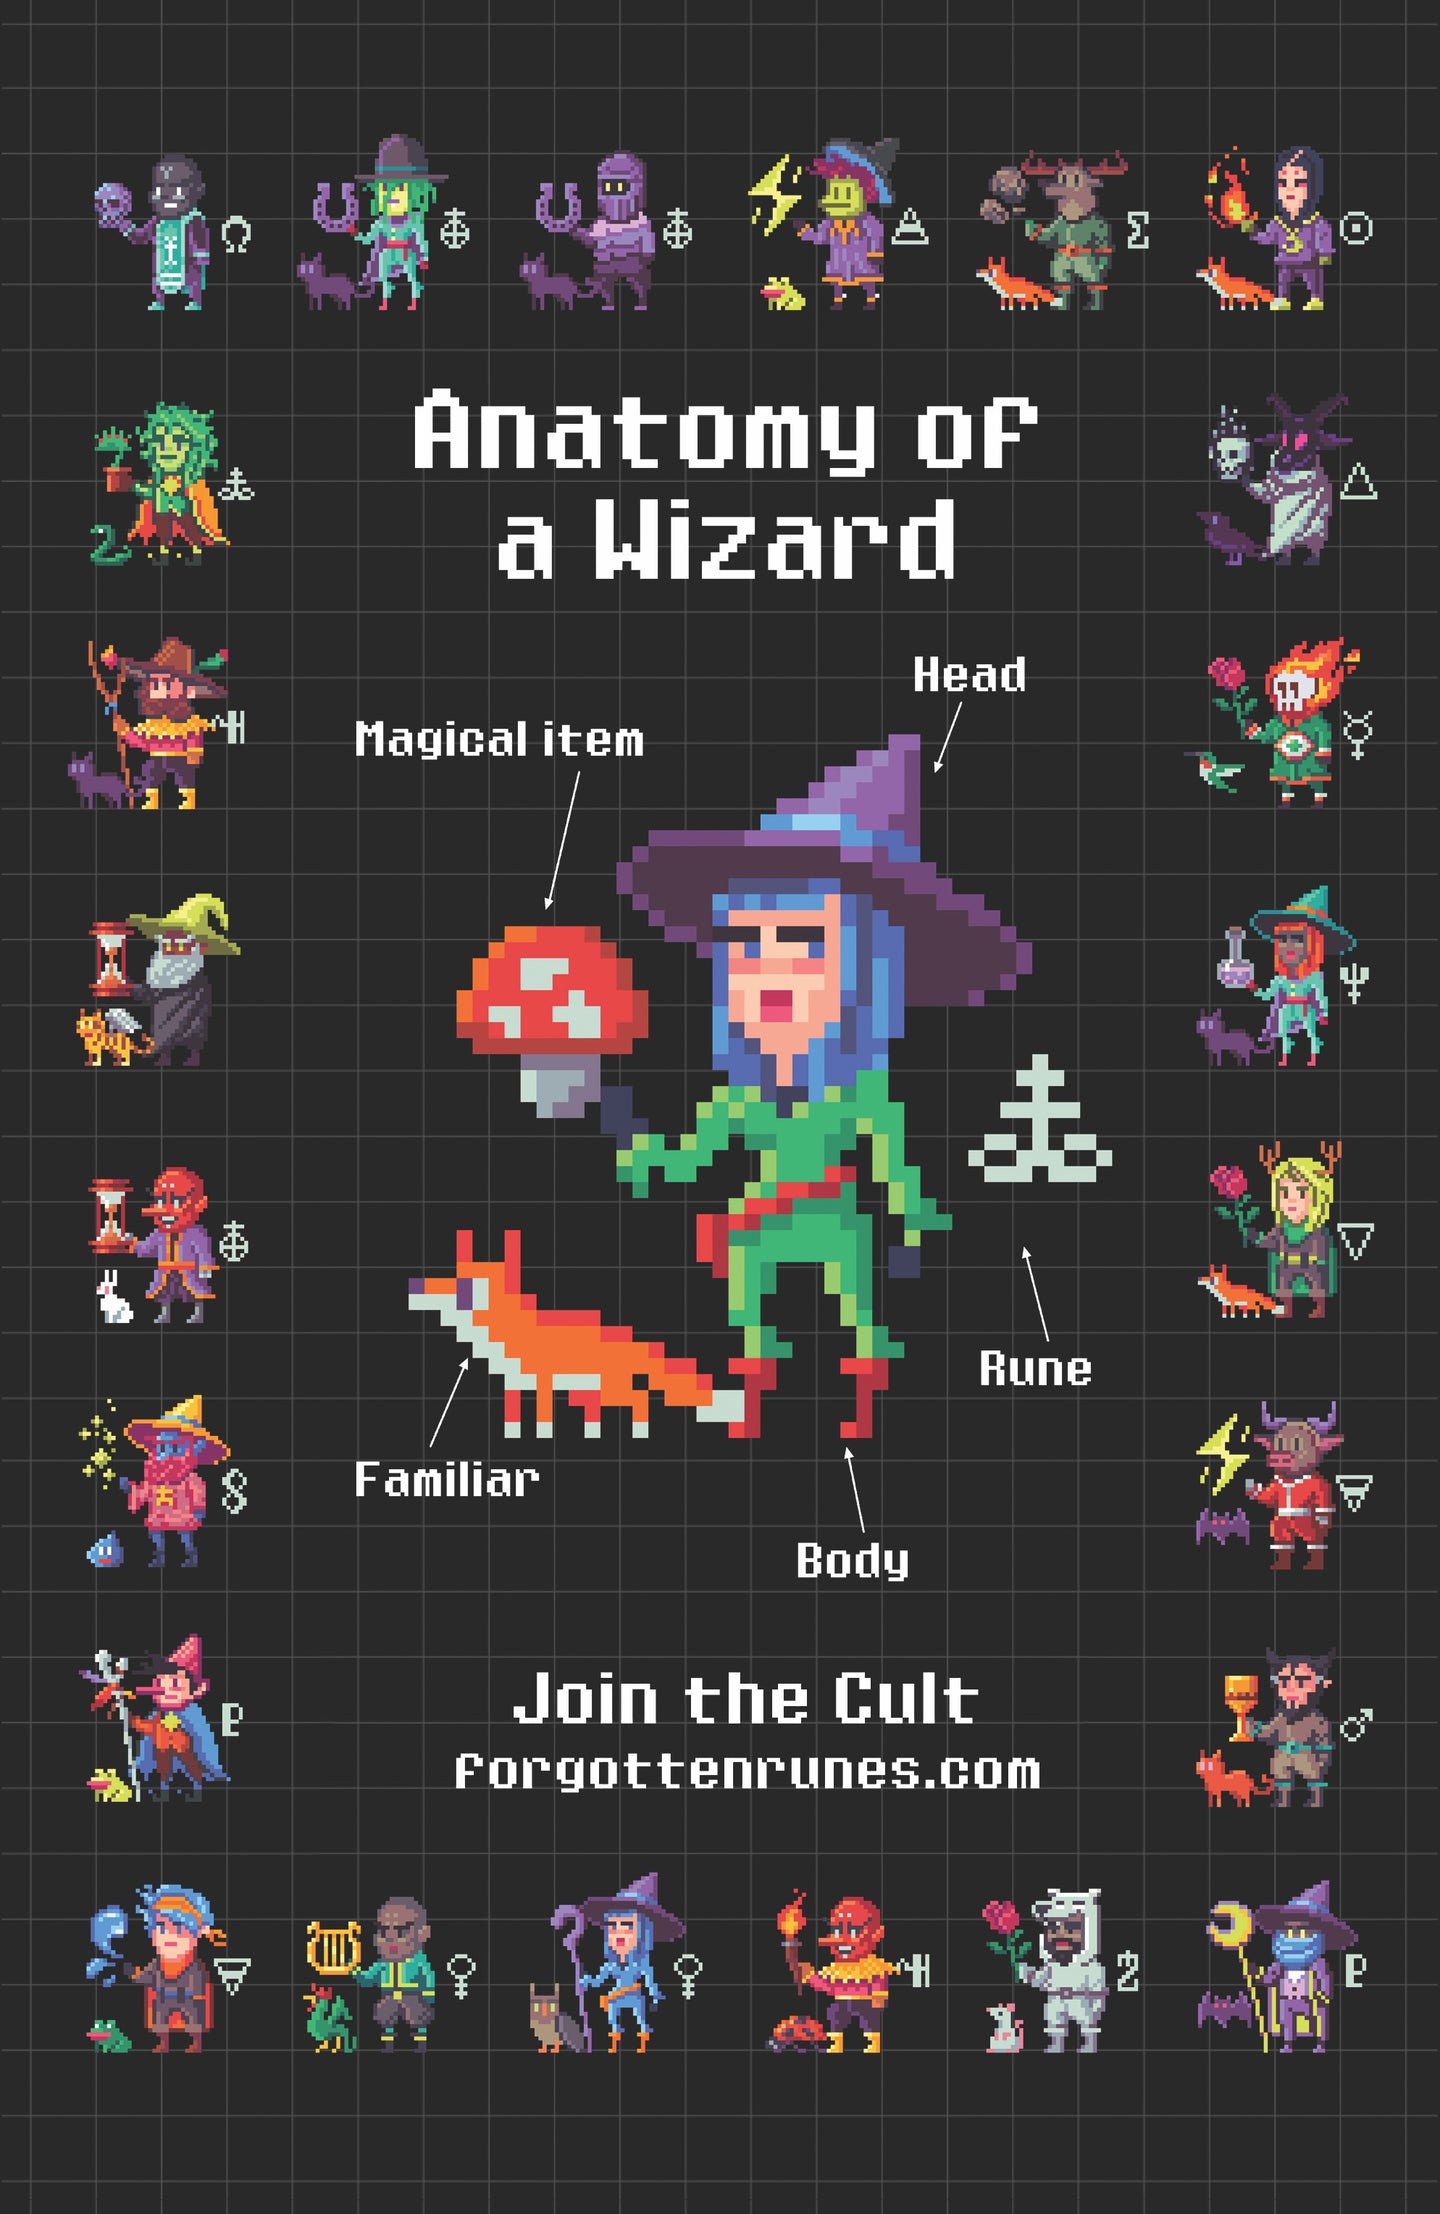 Anatomy of a Wizard Poster